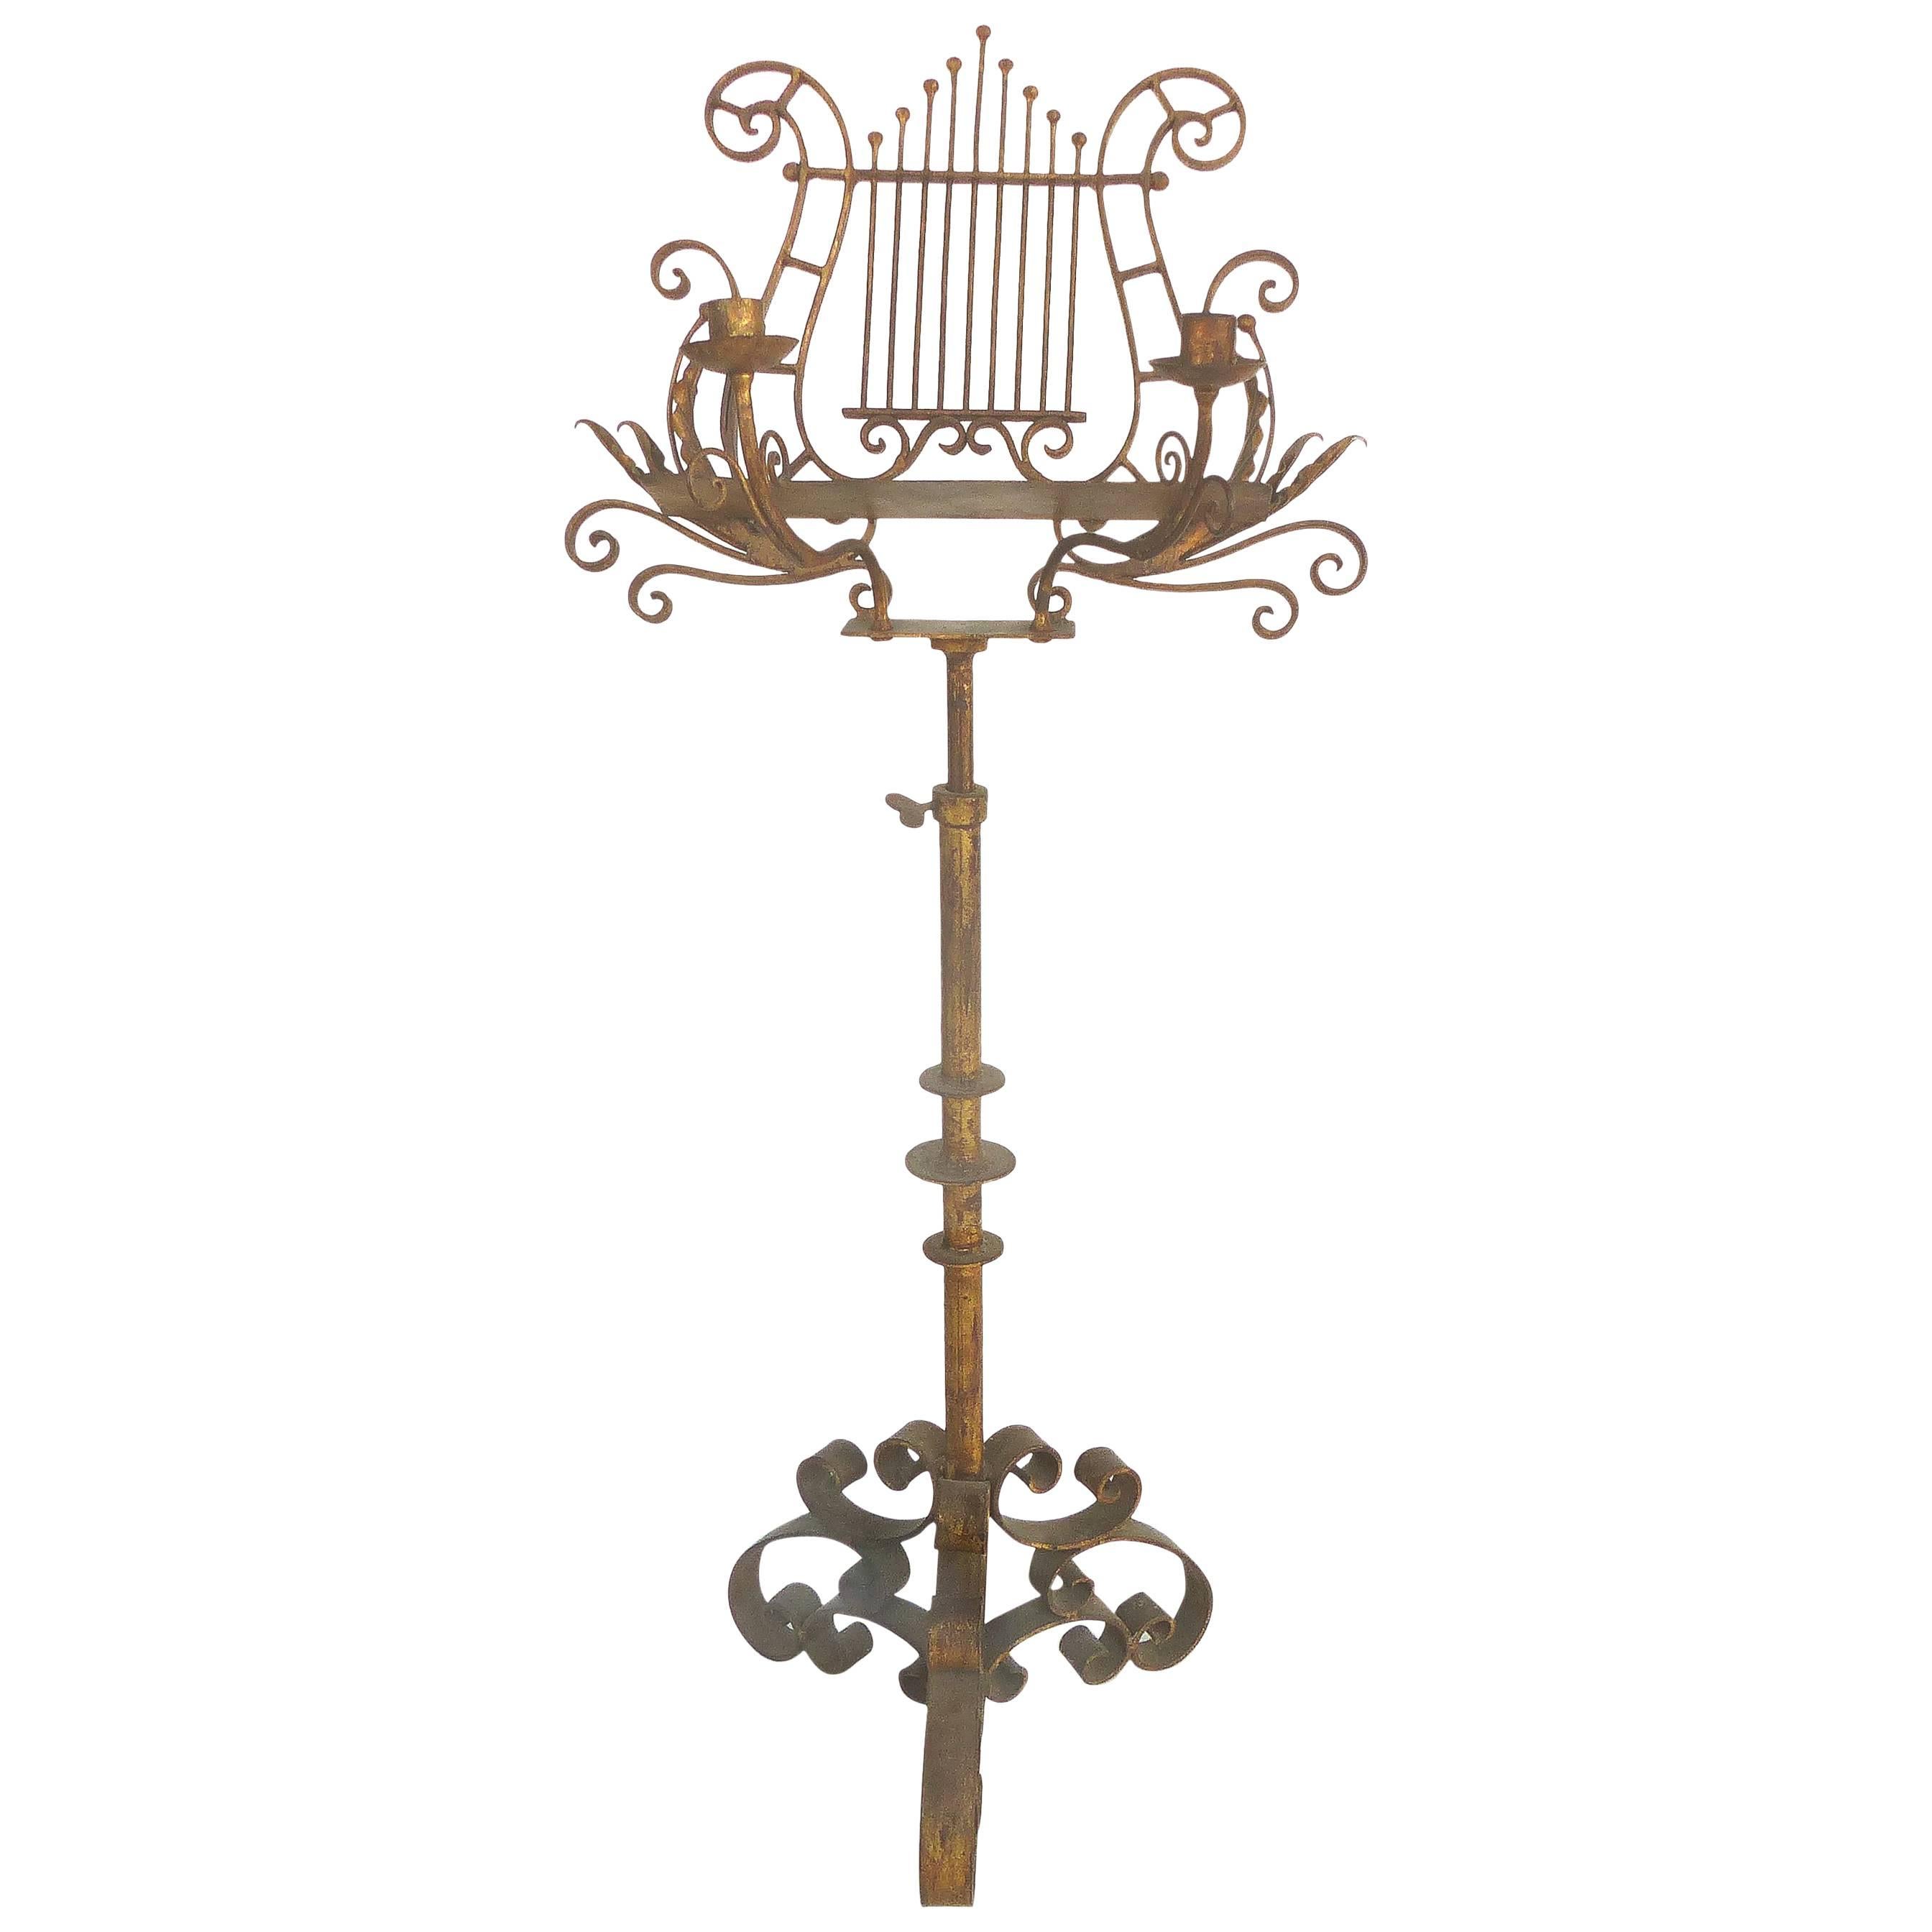 Early 20th Century Music Stand with Candelabra Arms and Lyre Shaped Stand